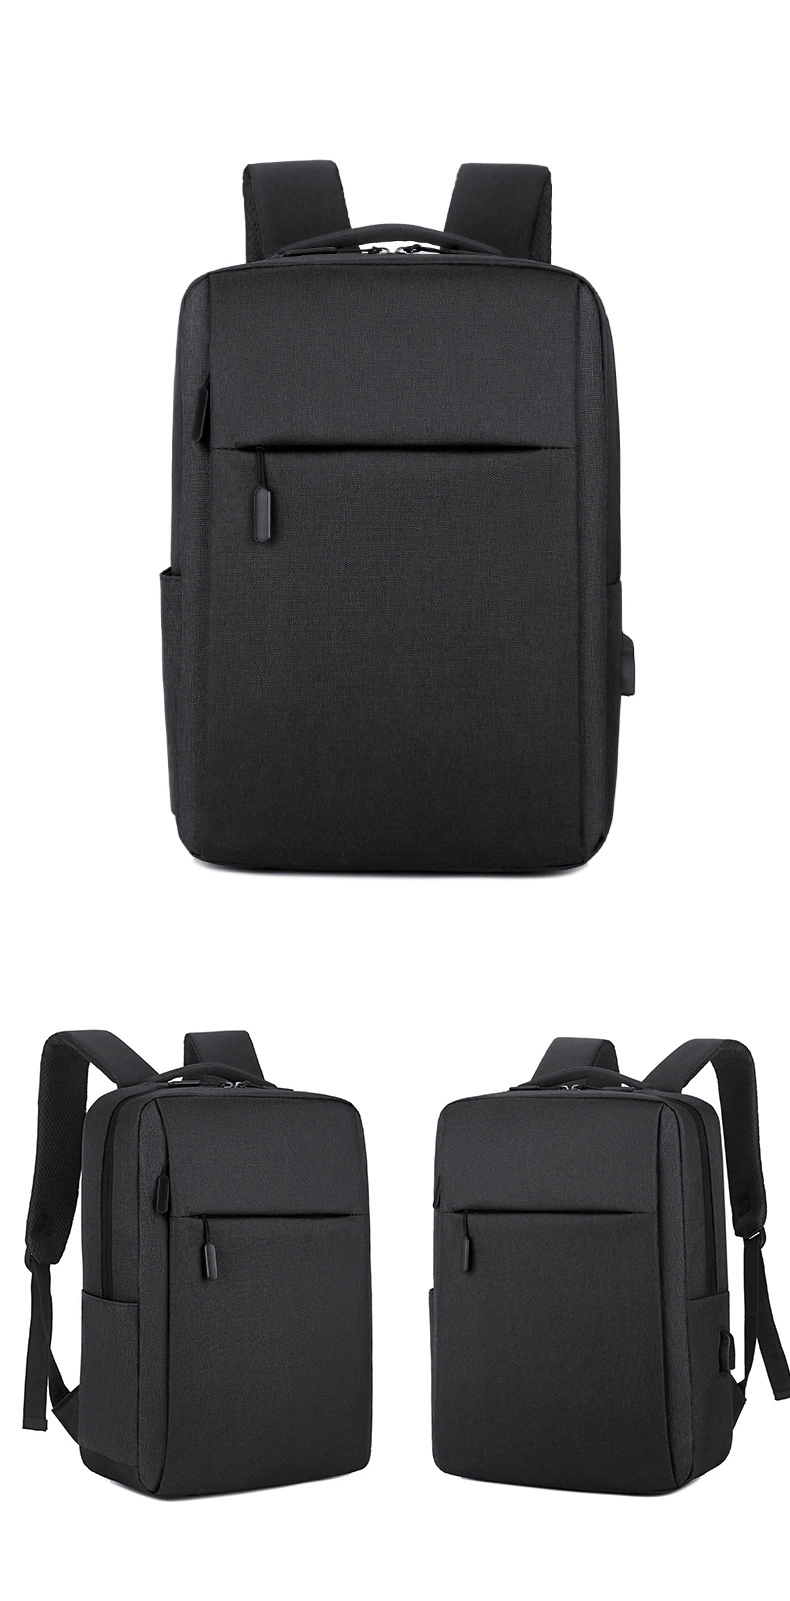 China Supplier Water Resistant Backpack with USB Charging Port Multi-Function School Backpack